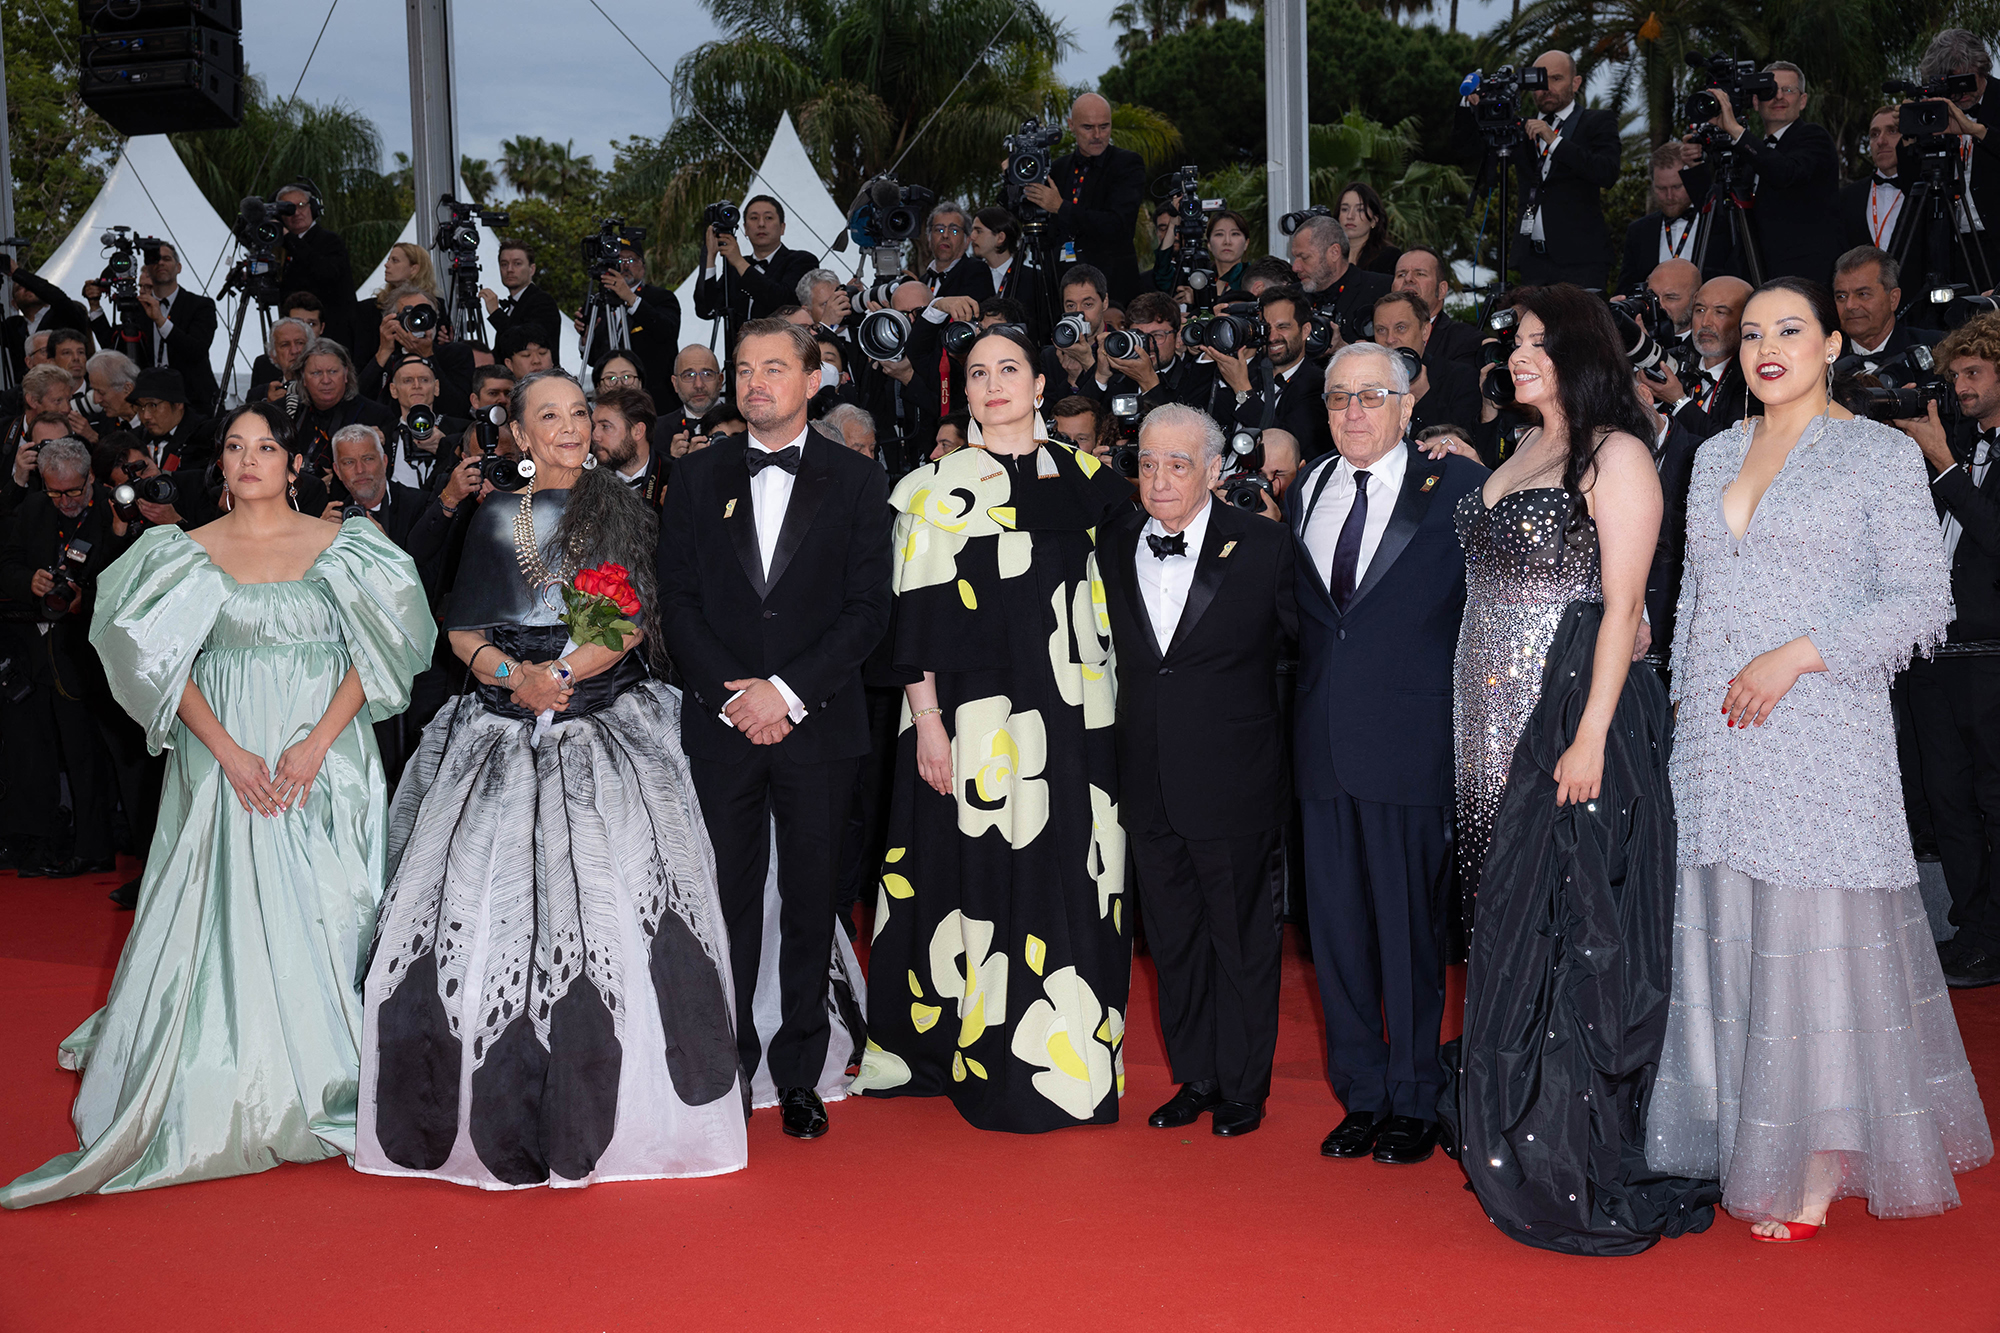 Robert De Niro, Tiffany Chen Stun at Cannes After Welcoming Baby | Us ...